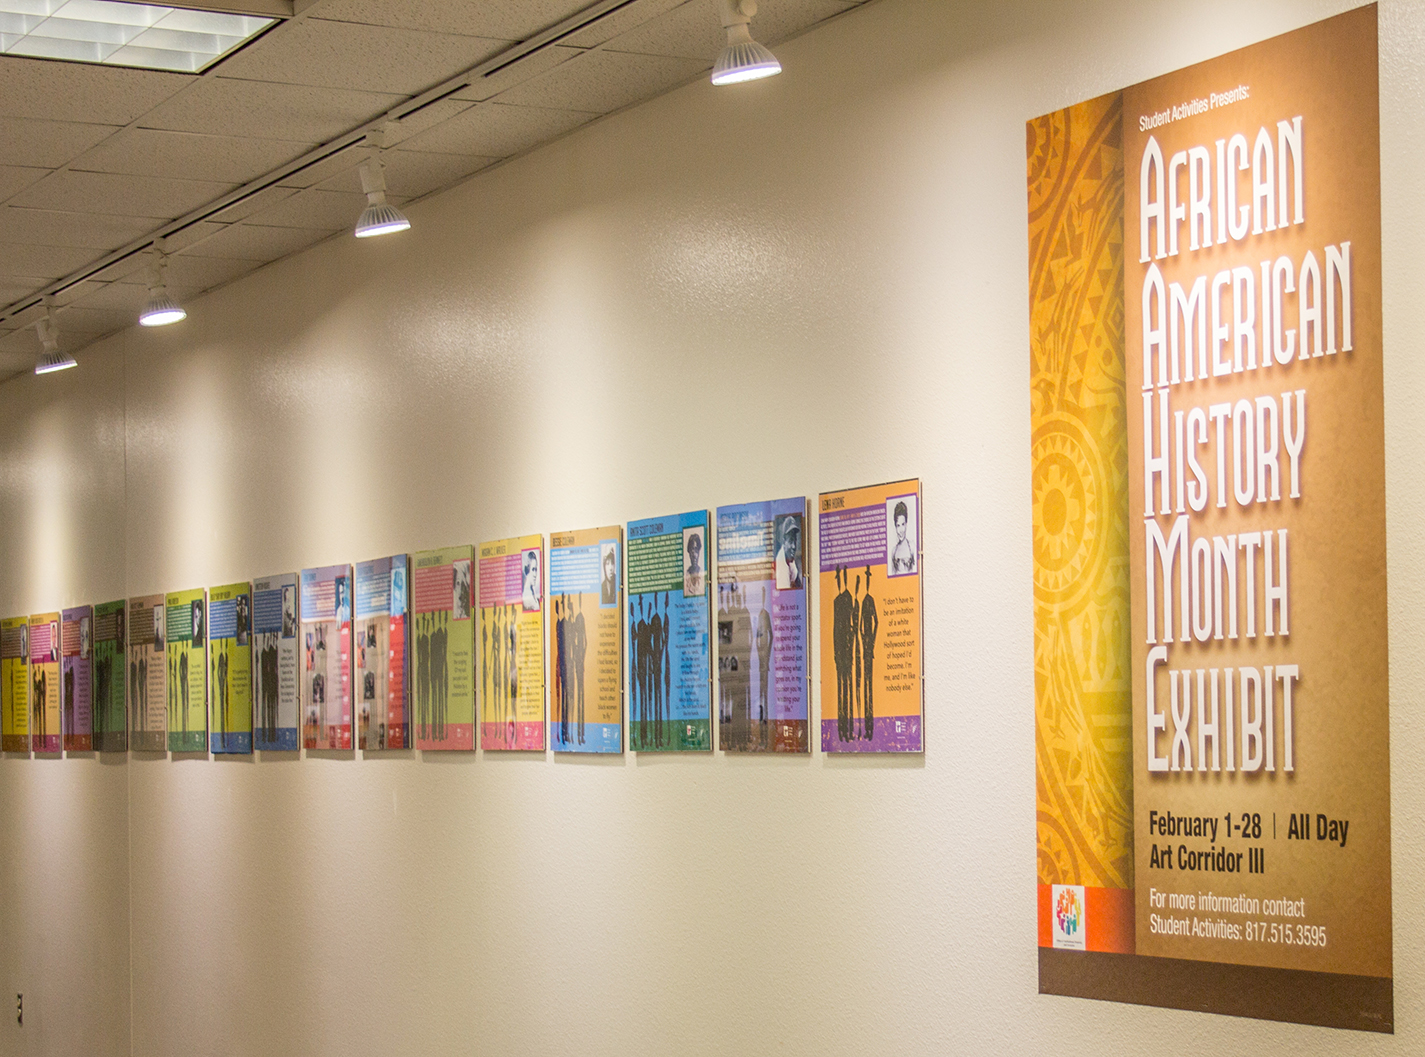 The exhibit also features biographies of African-Americans who pioneered different areas in history, expanding the conversation beyond Martin Luther King Jr.’s impact.